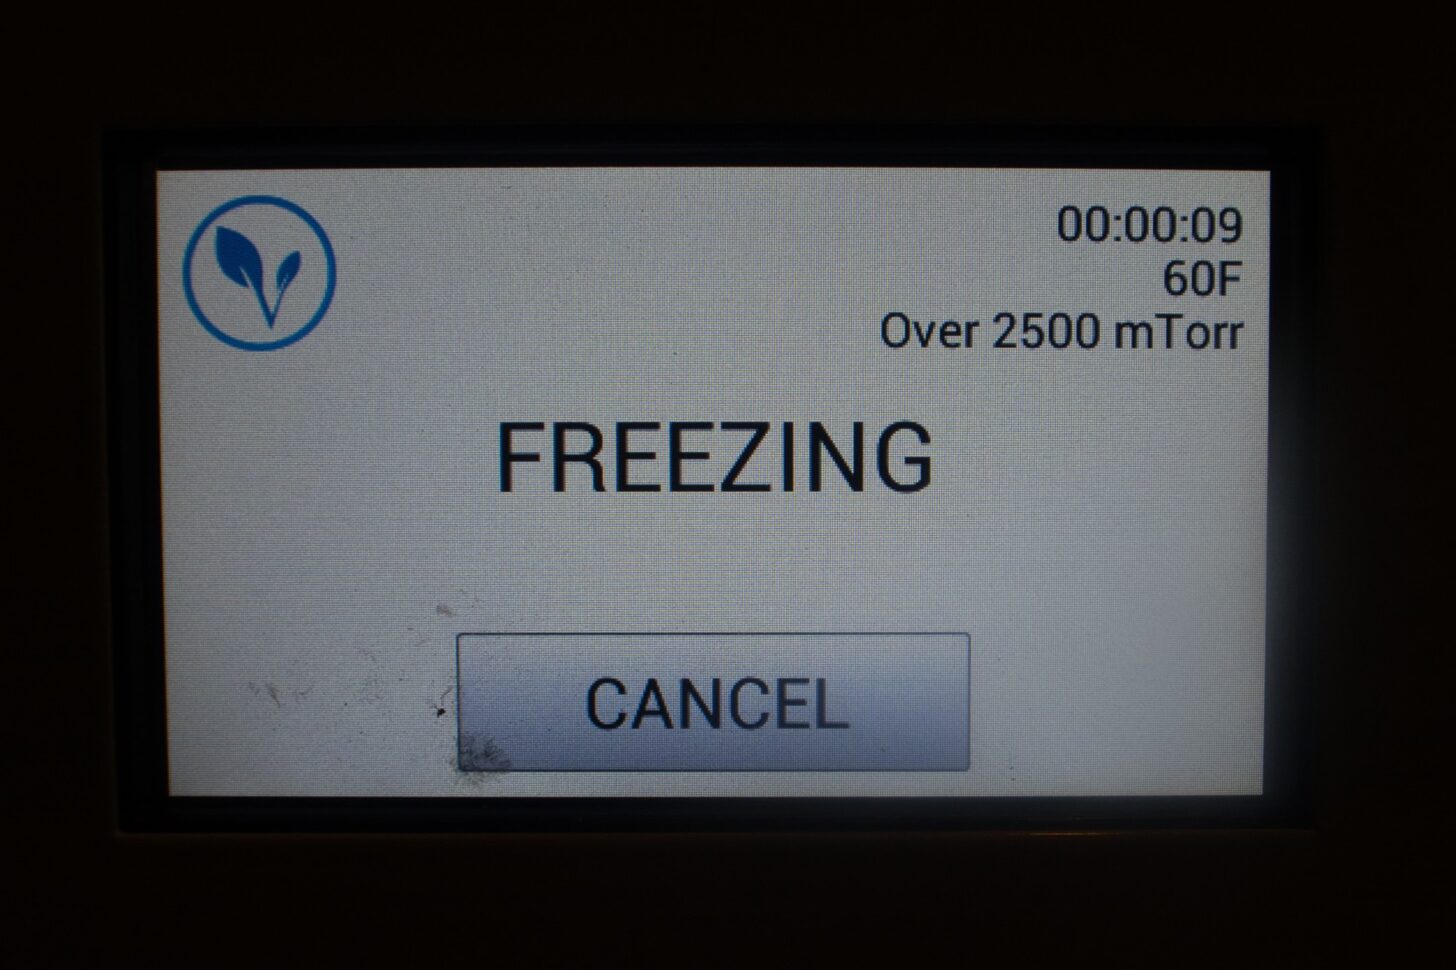 a menu on the harvest right freeze dryer that says "freezing" and lists a time to completion